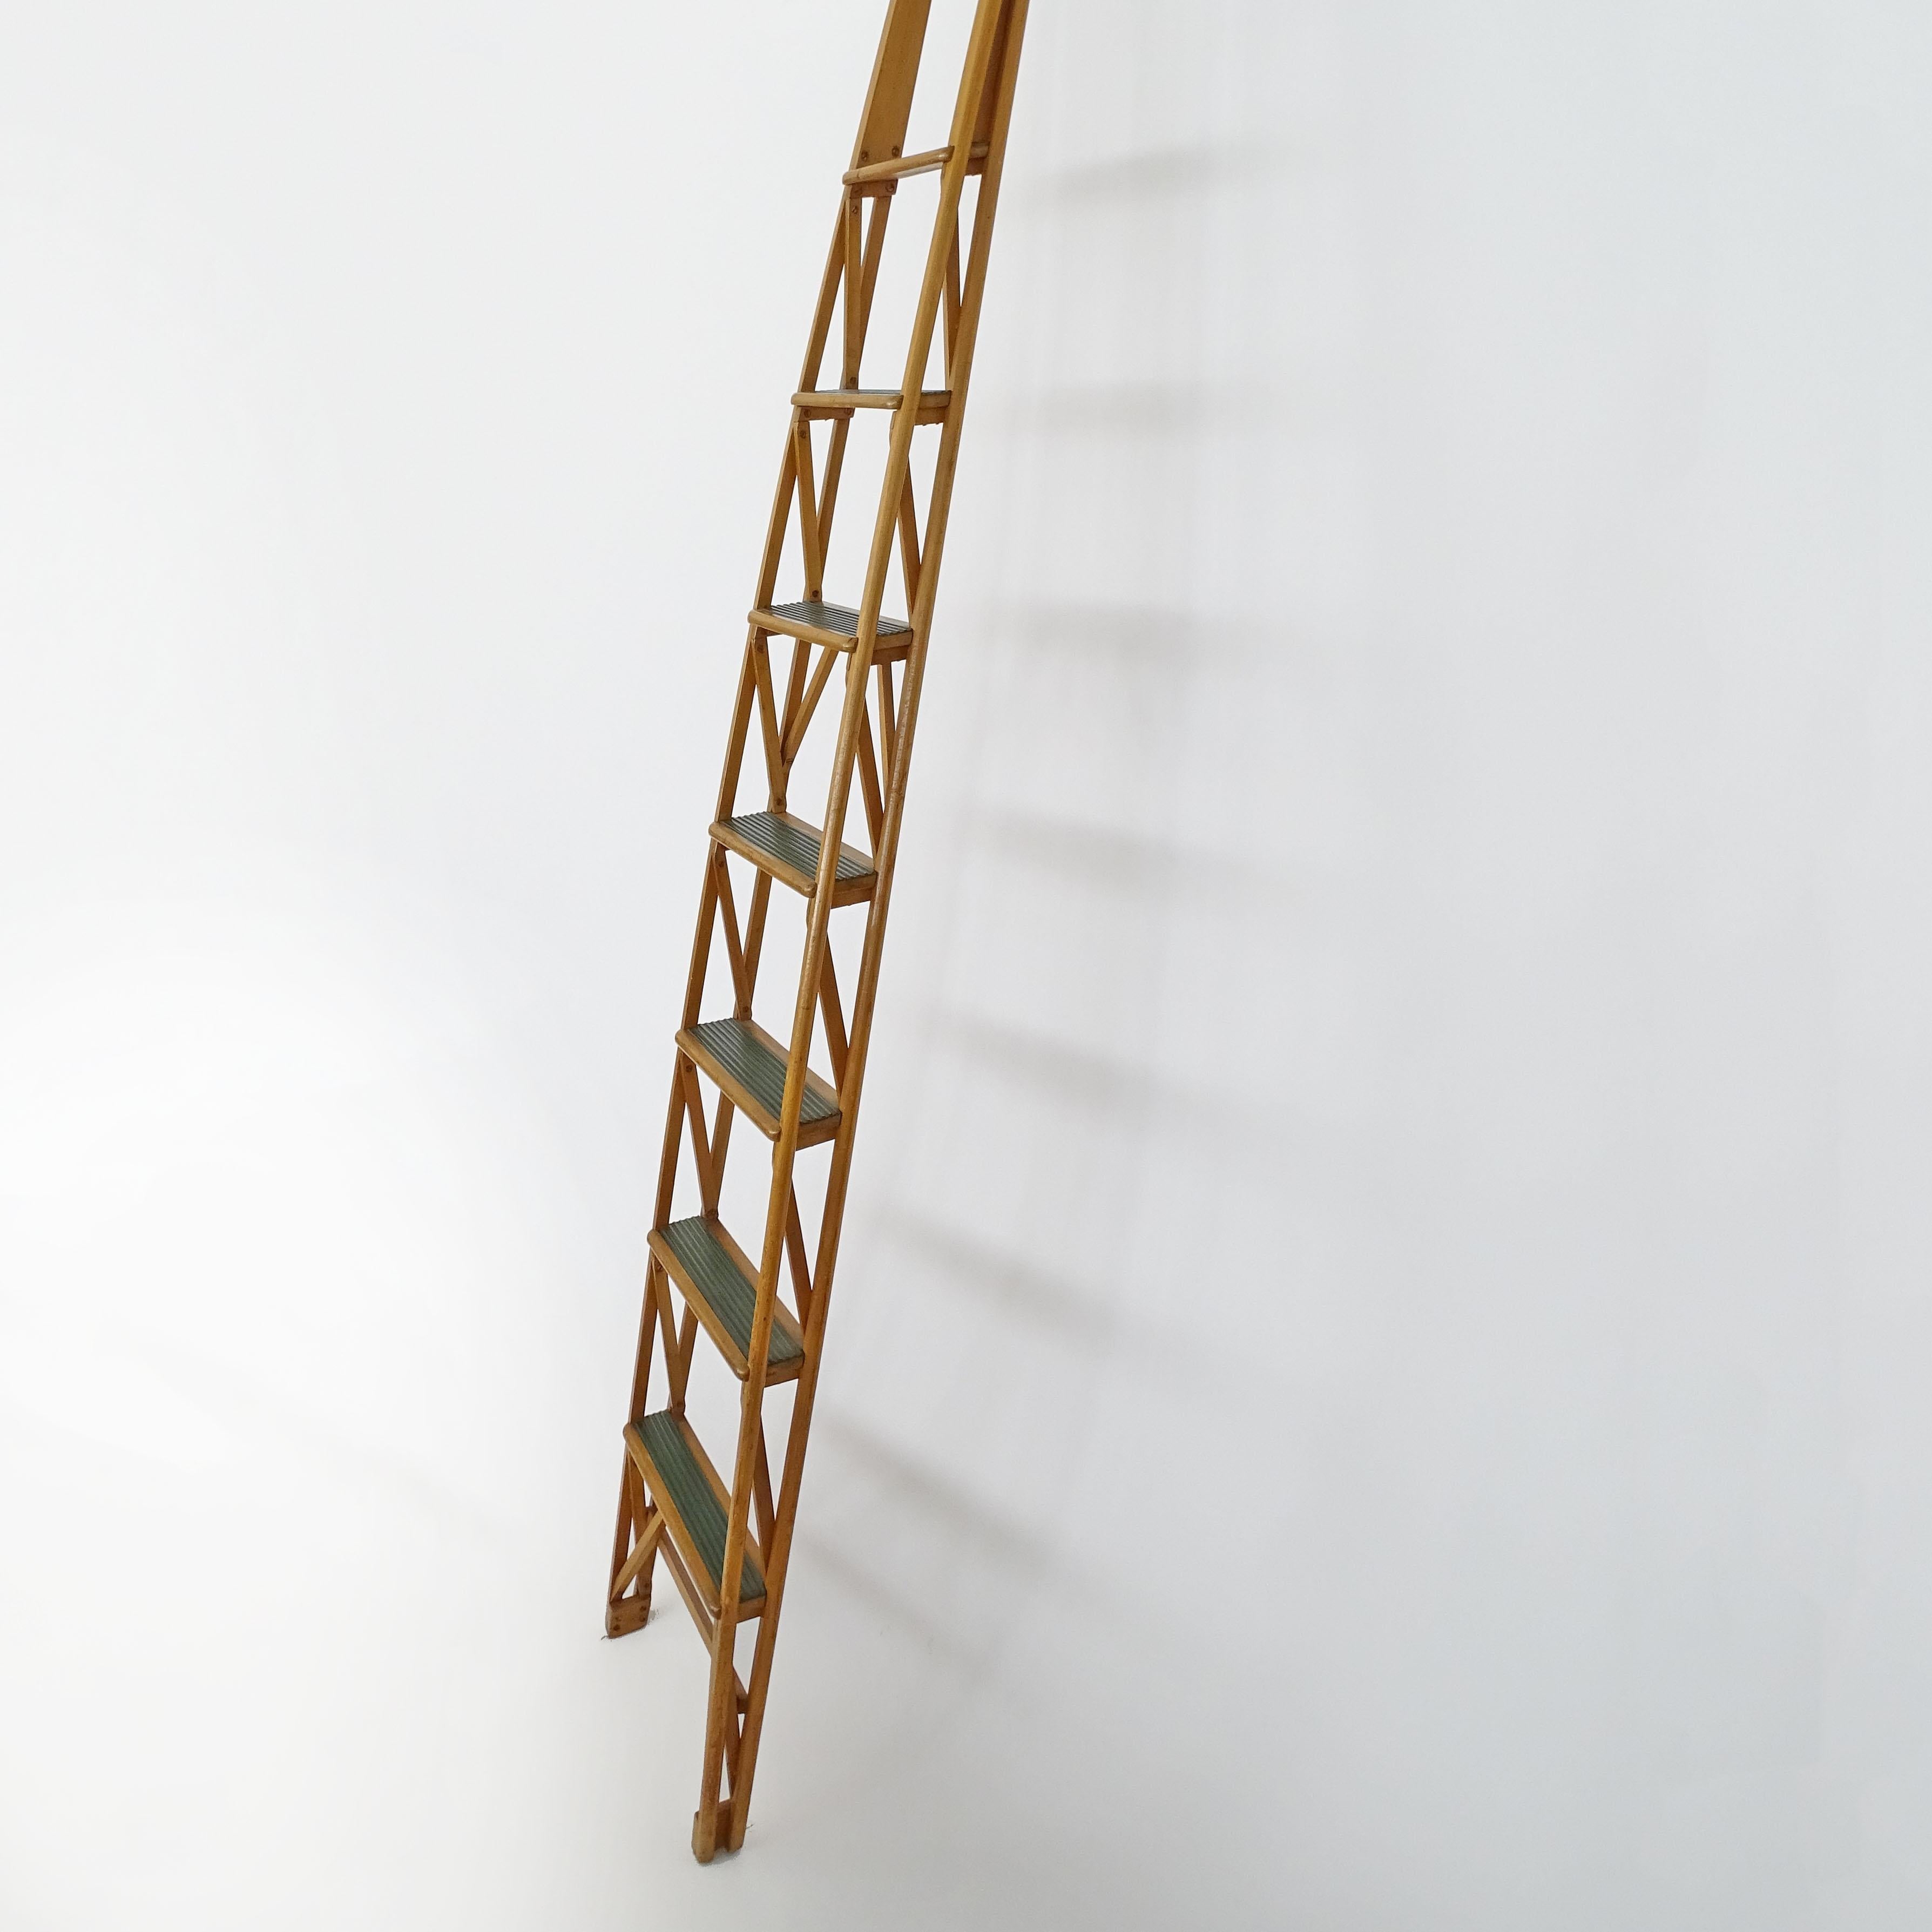 Italian Architectural Library Ladder Attributed to Franco Albini, 1950s 2